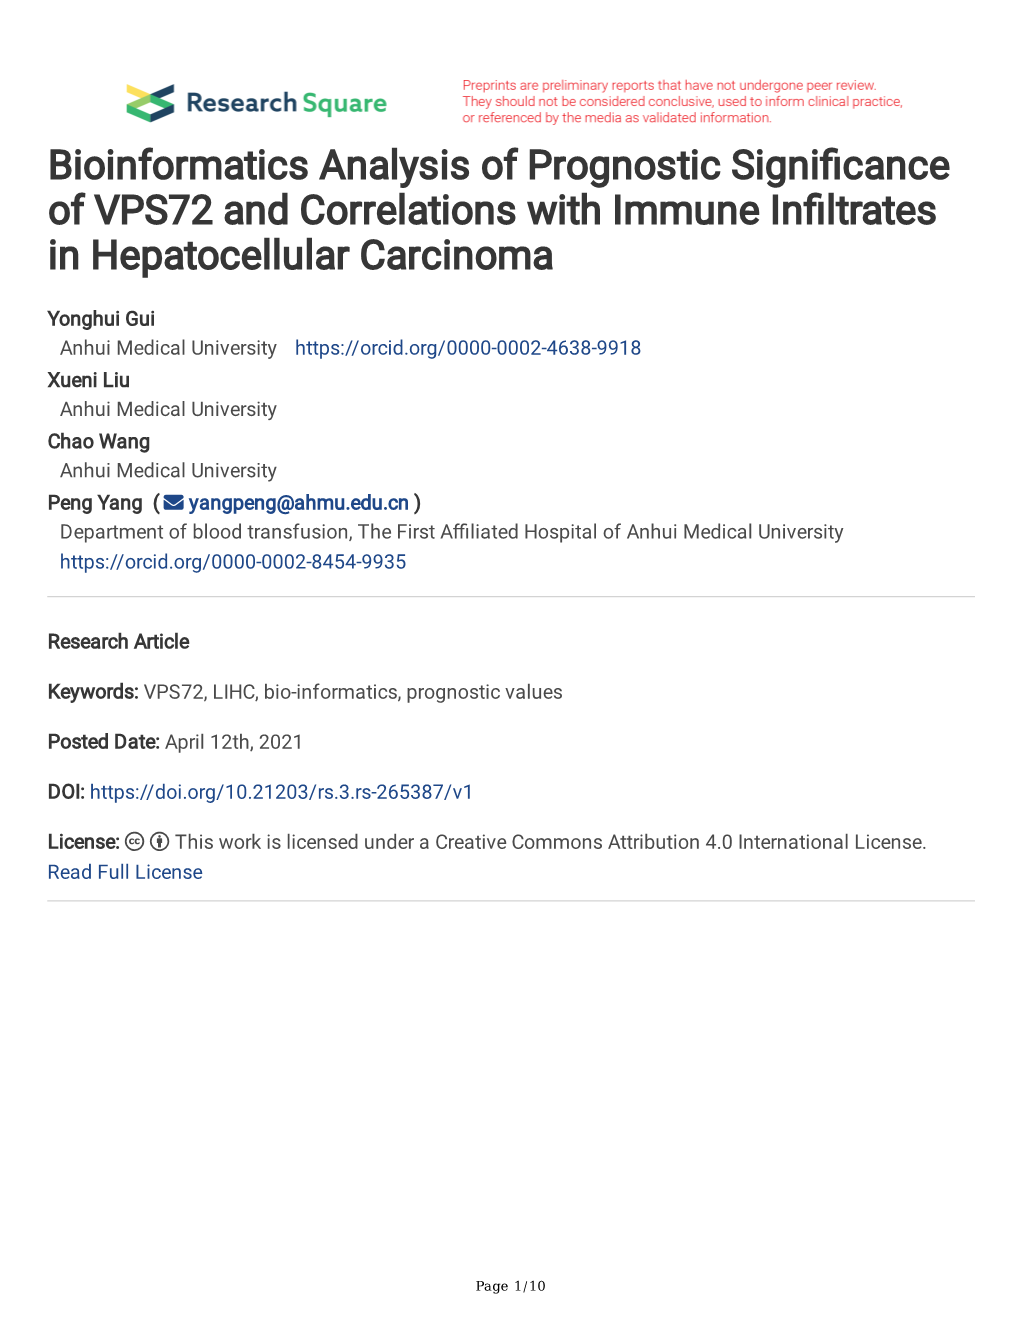 Bioinformatics Analysis of Prognostic Signi Cance of VPS72 and Correlations with Immune in Ltrates in Hepatocellular Carcinoma